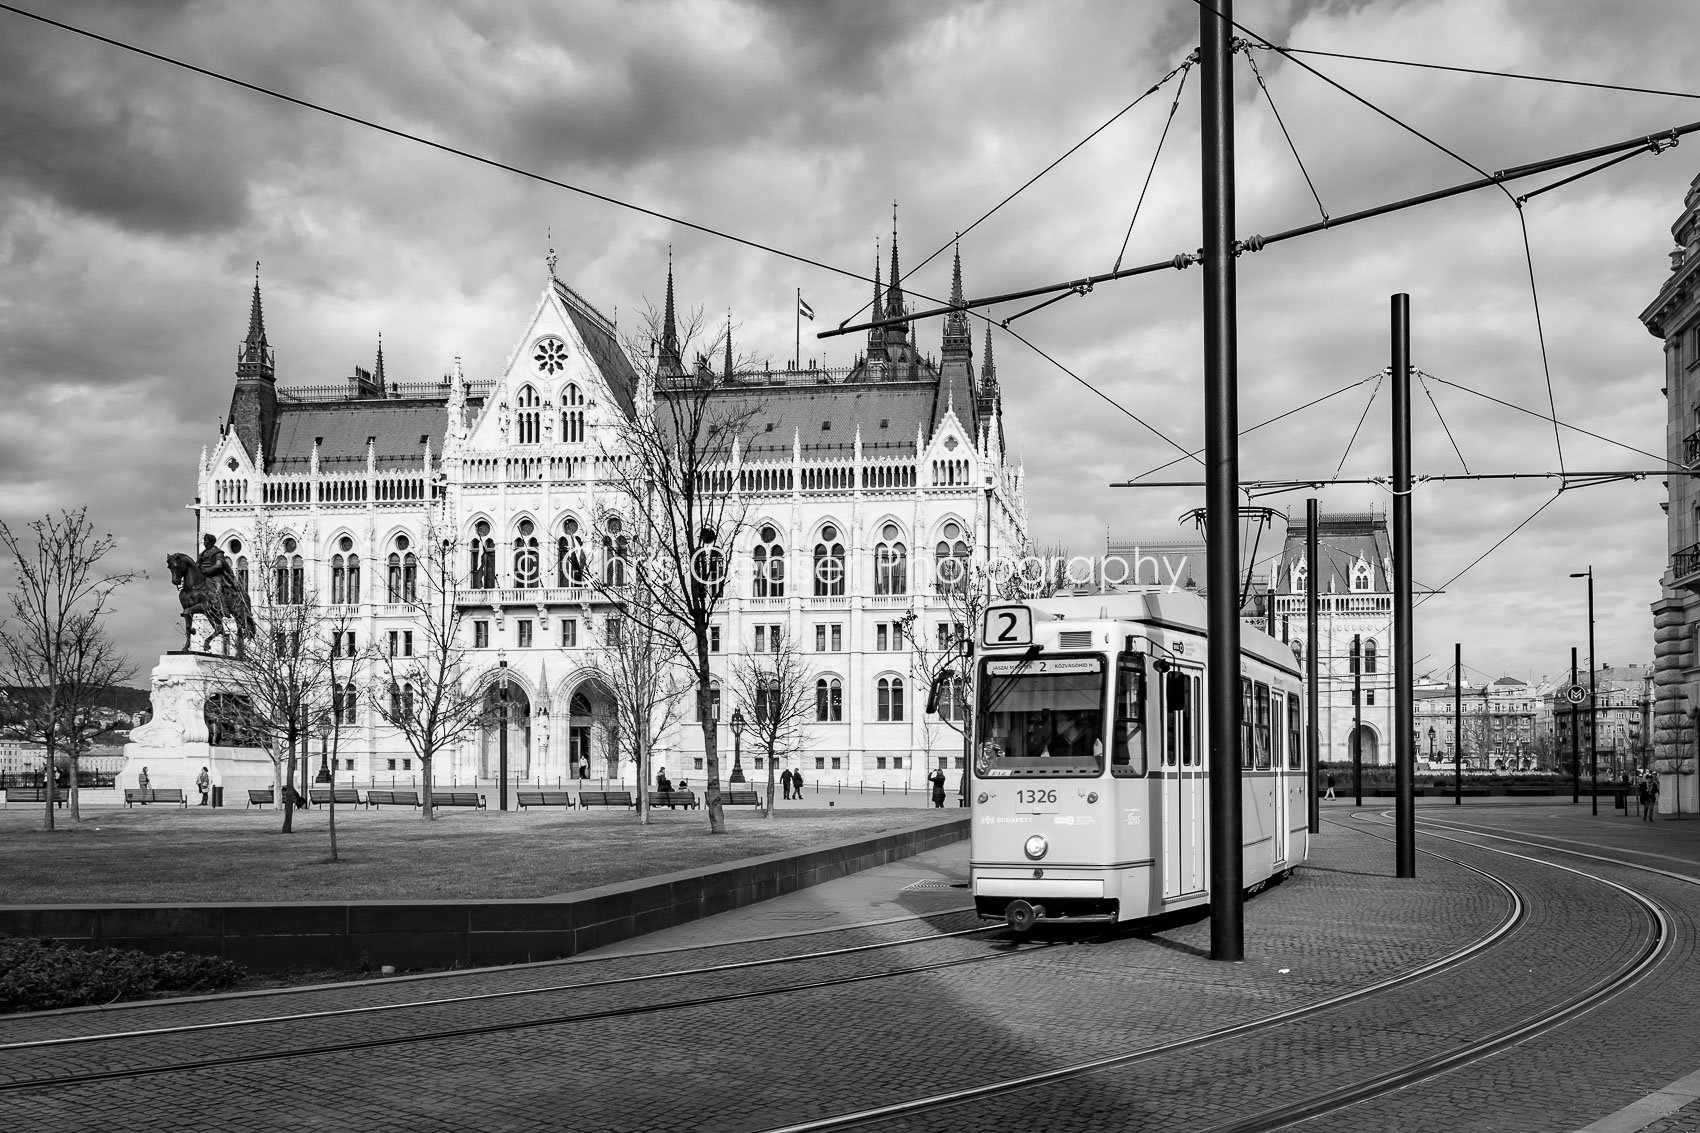 Trams & History, Budapest